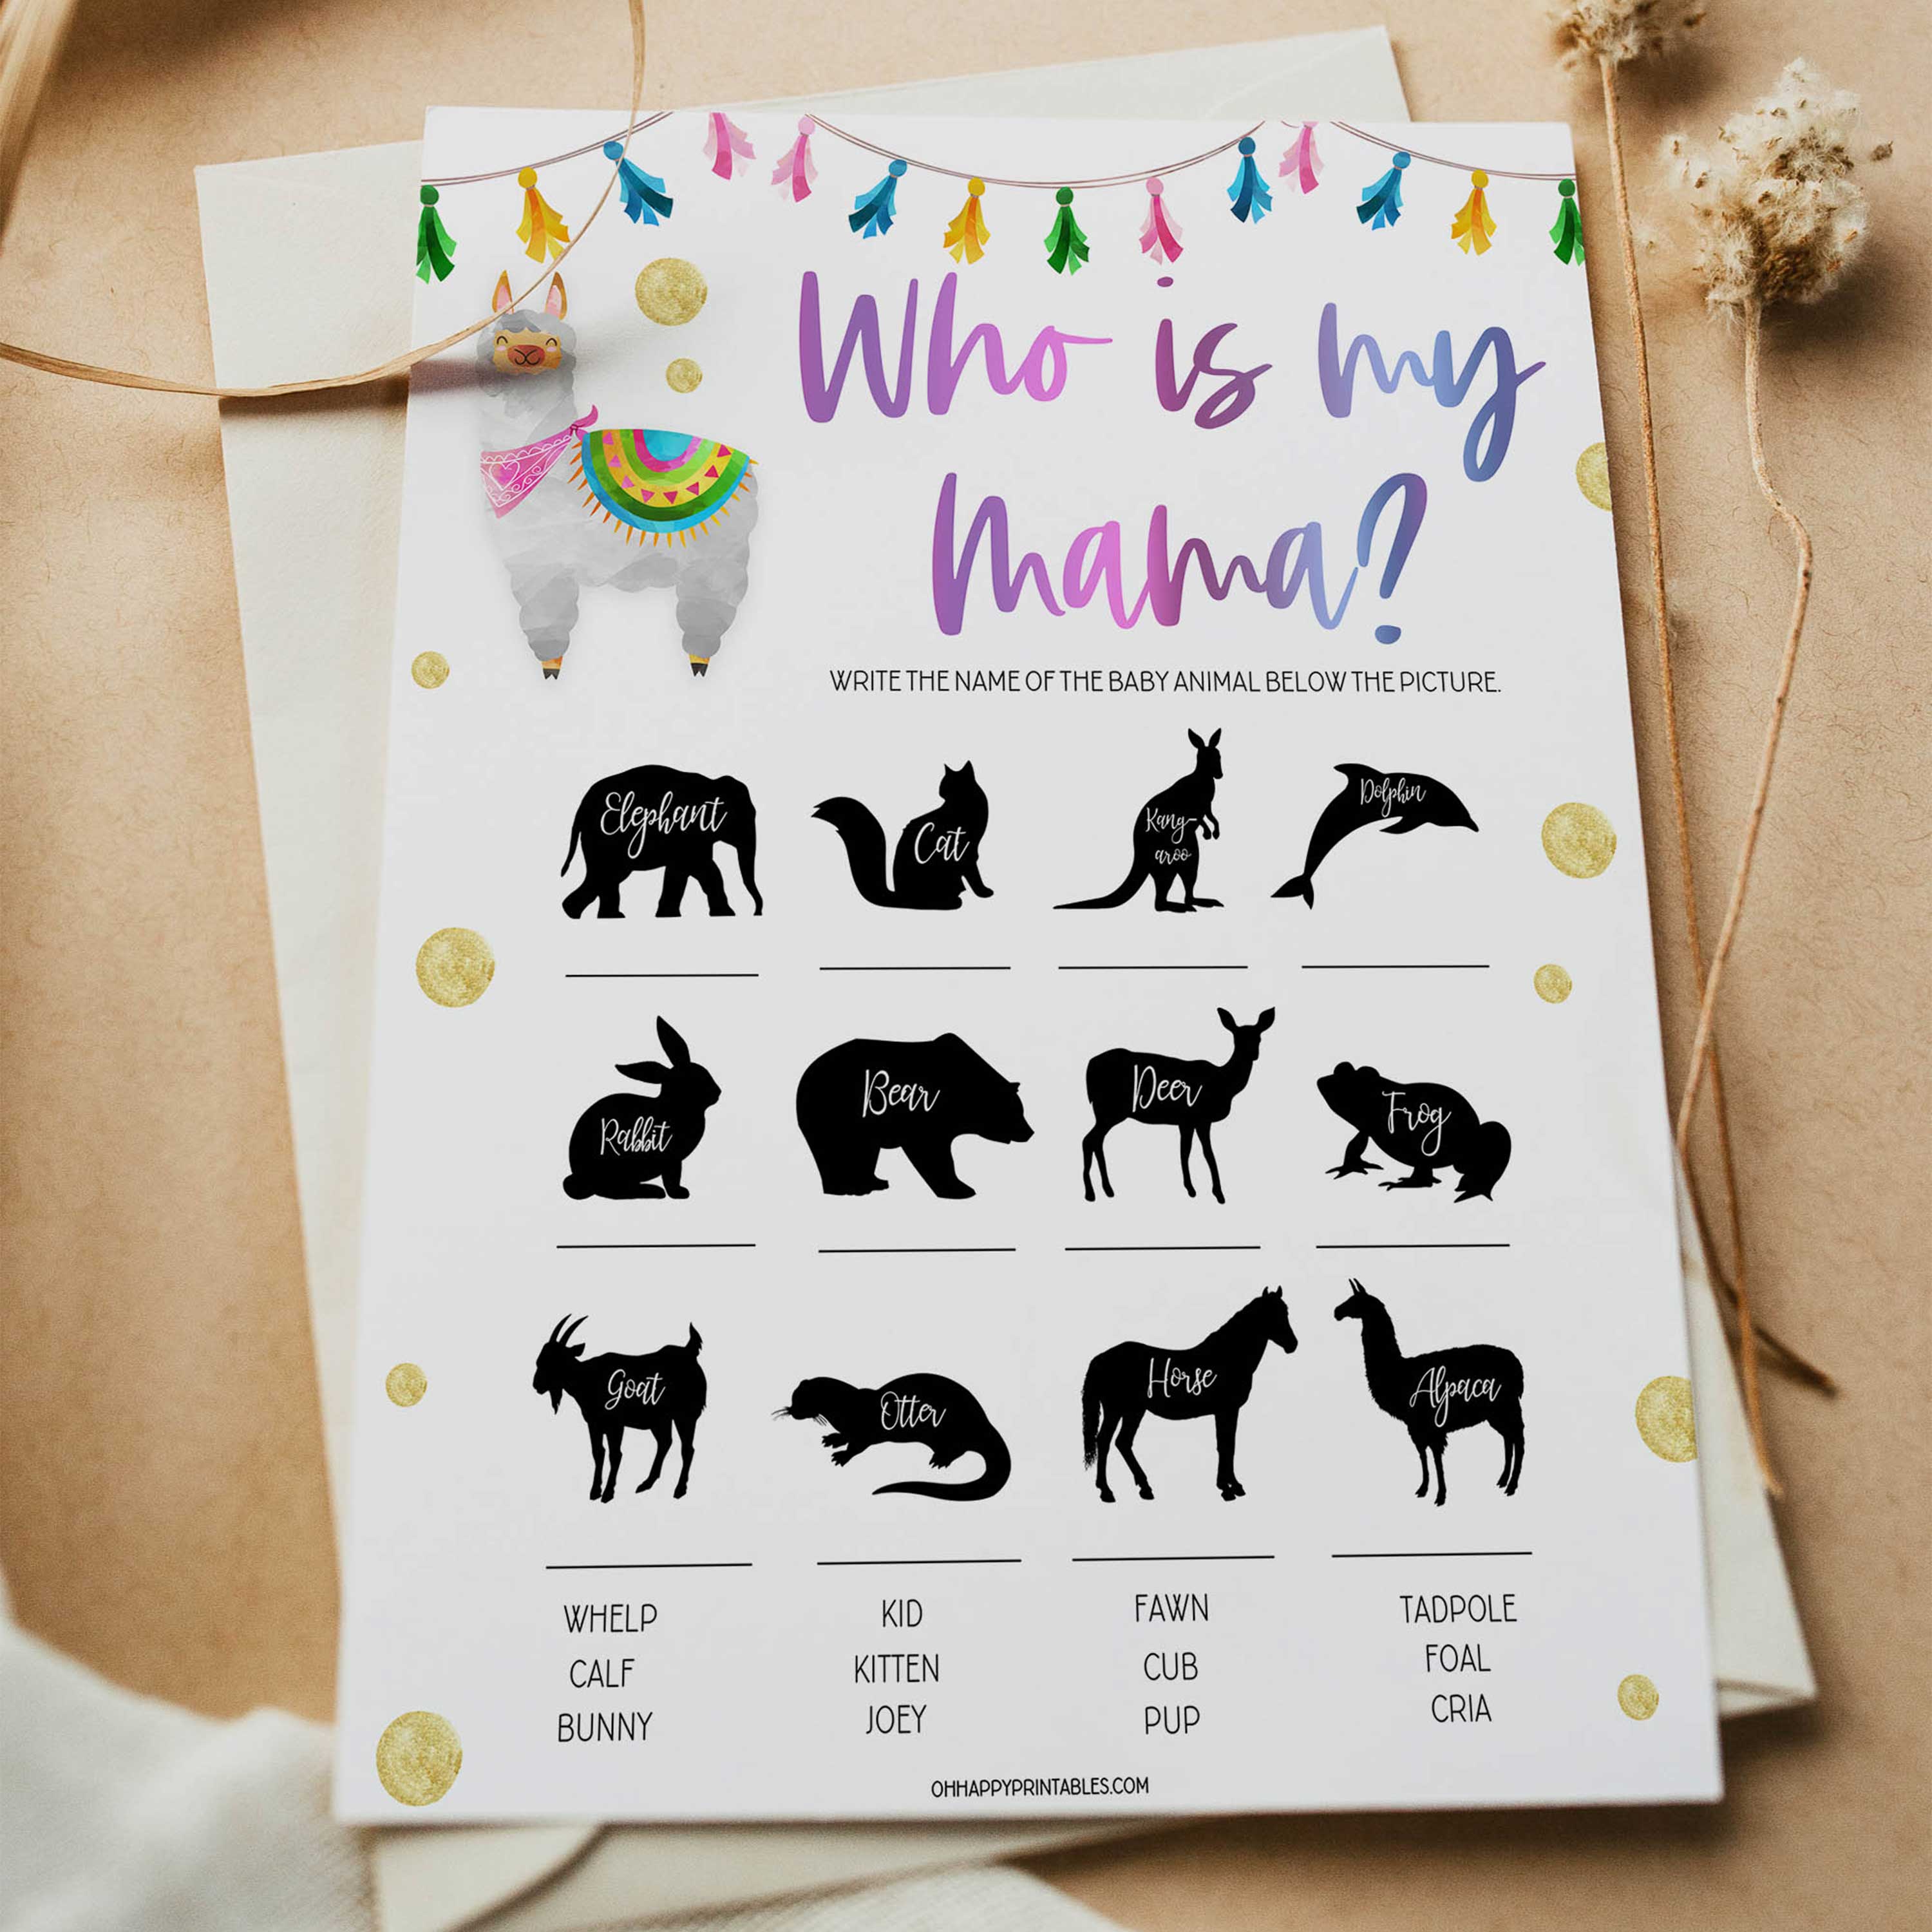 who is my mama baby game, Printable baby shower games, llama fiesta fun baby games, baby shower games, fun baby shower ideas, top baby shower ideas, Llama fiesta shower baby shower, fiesta baby shower ideas